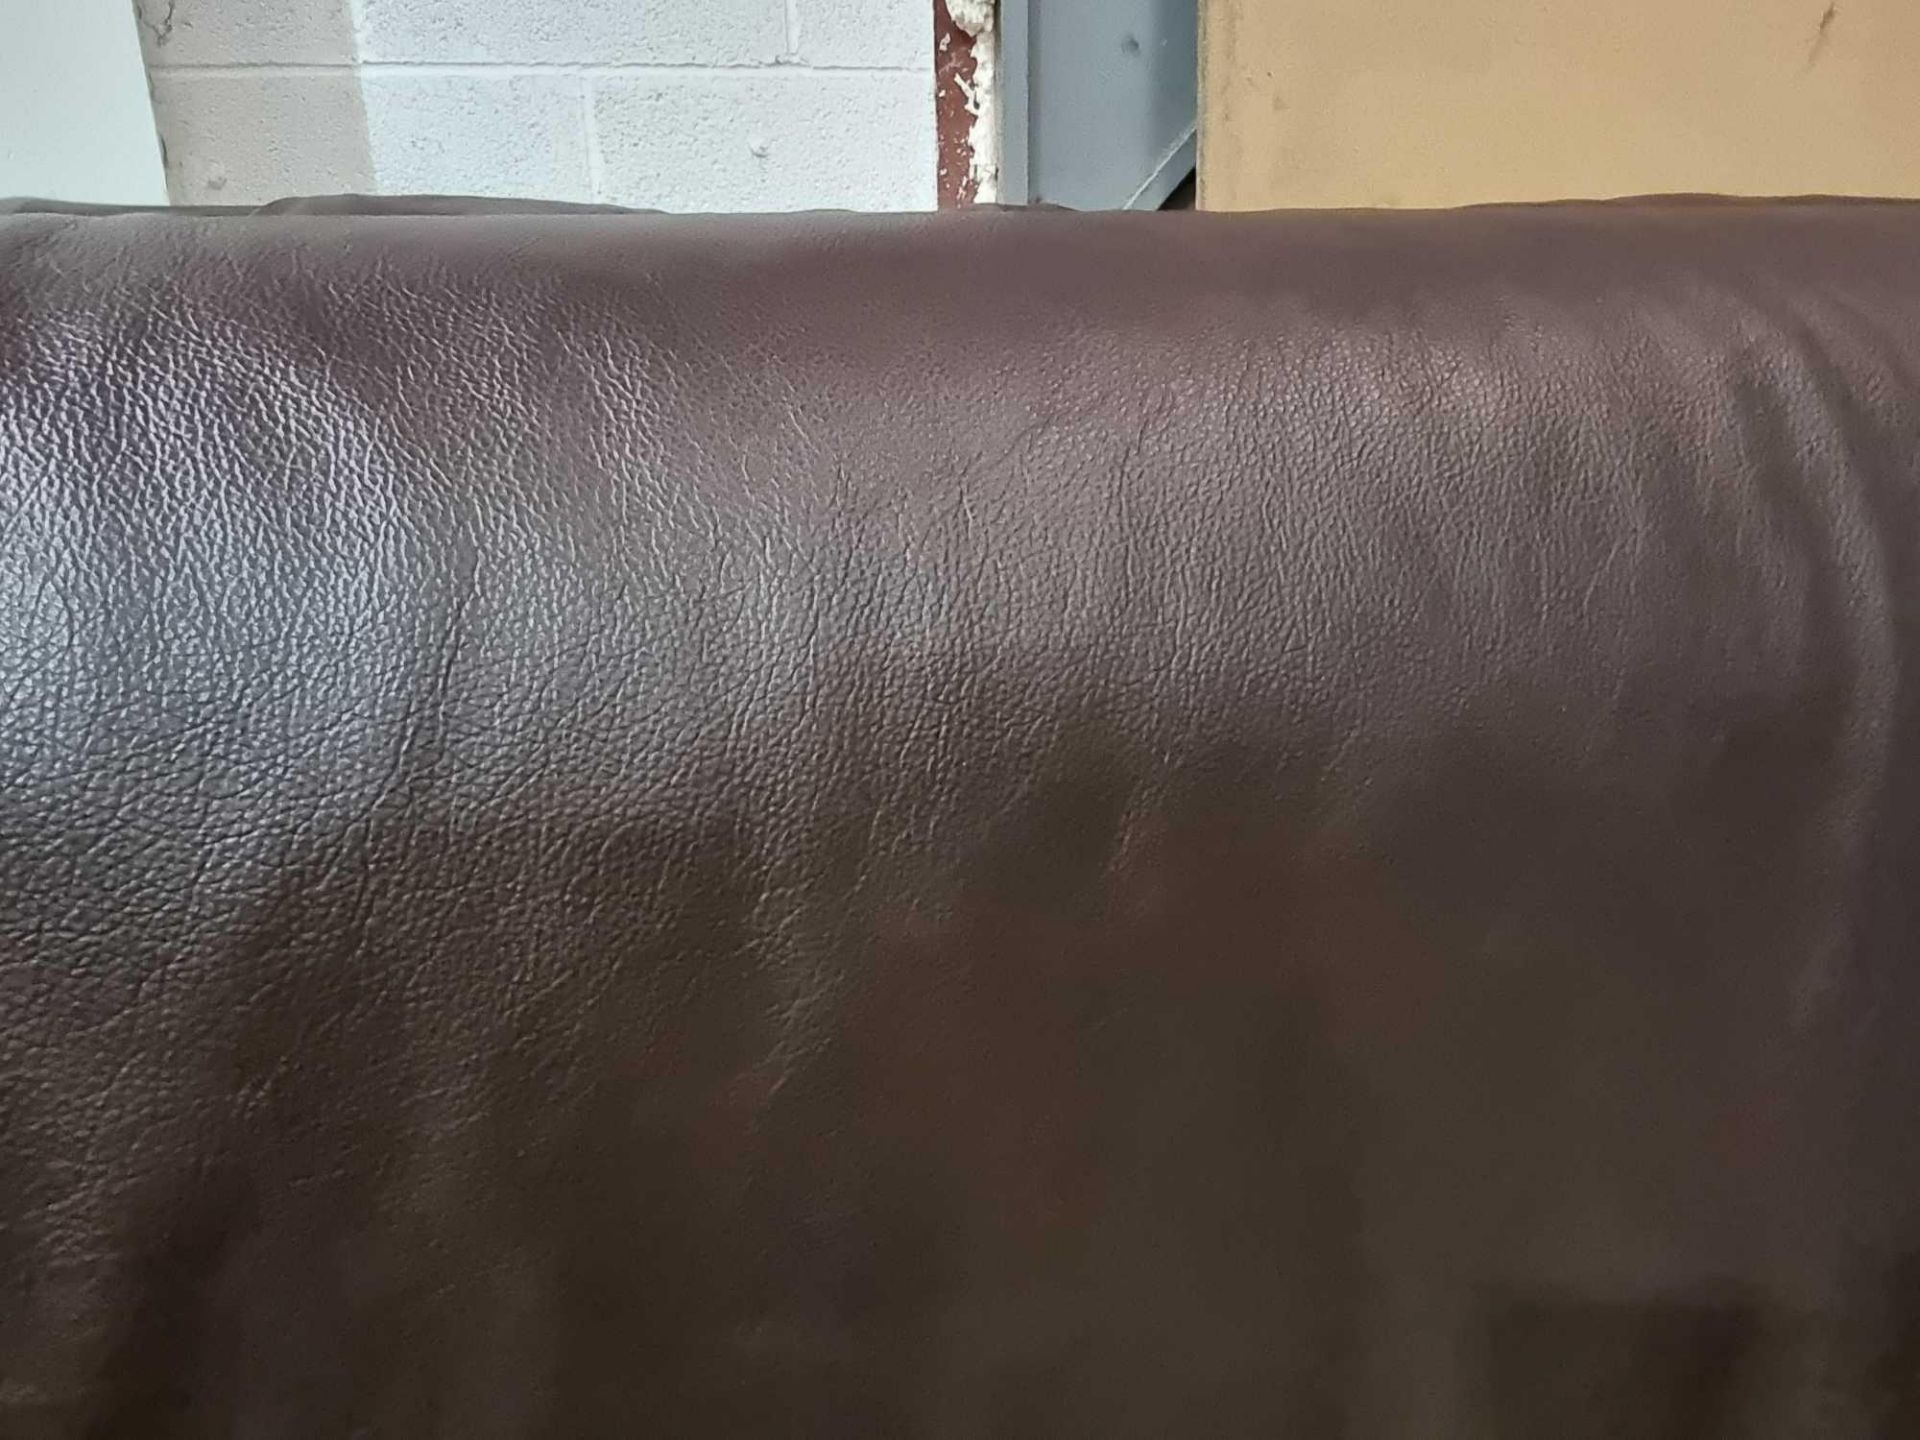 Mastrotto Hudson Chocolate Leather Hide approximately 3.2mÂ² 2 x 1.6cm